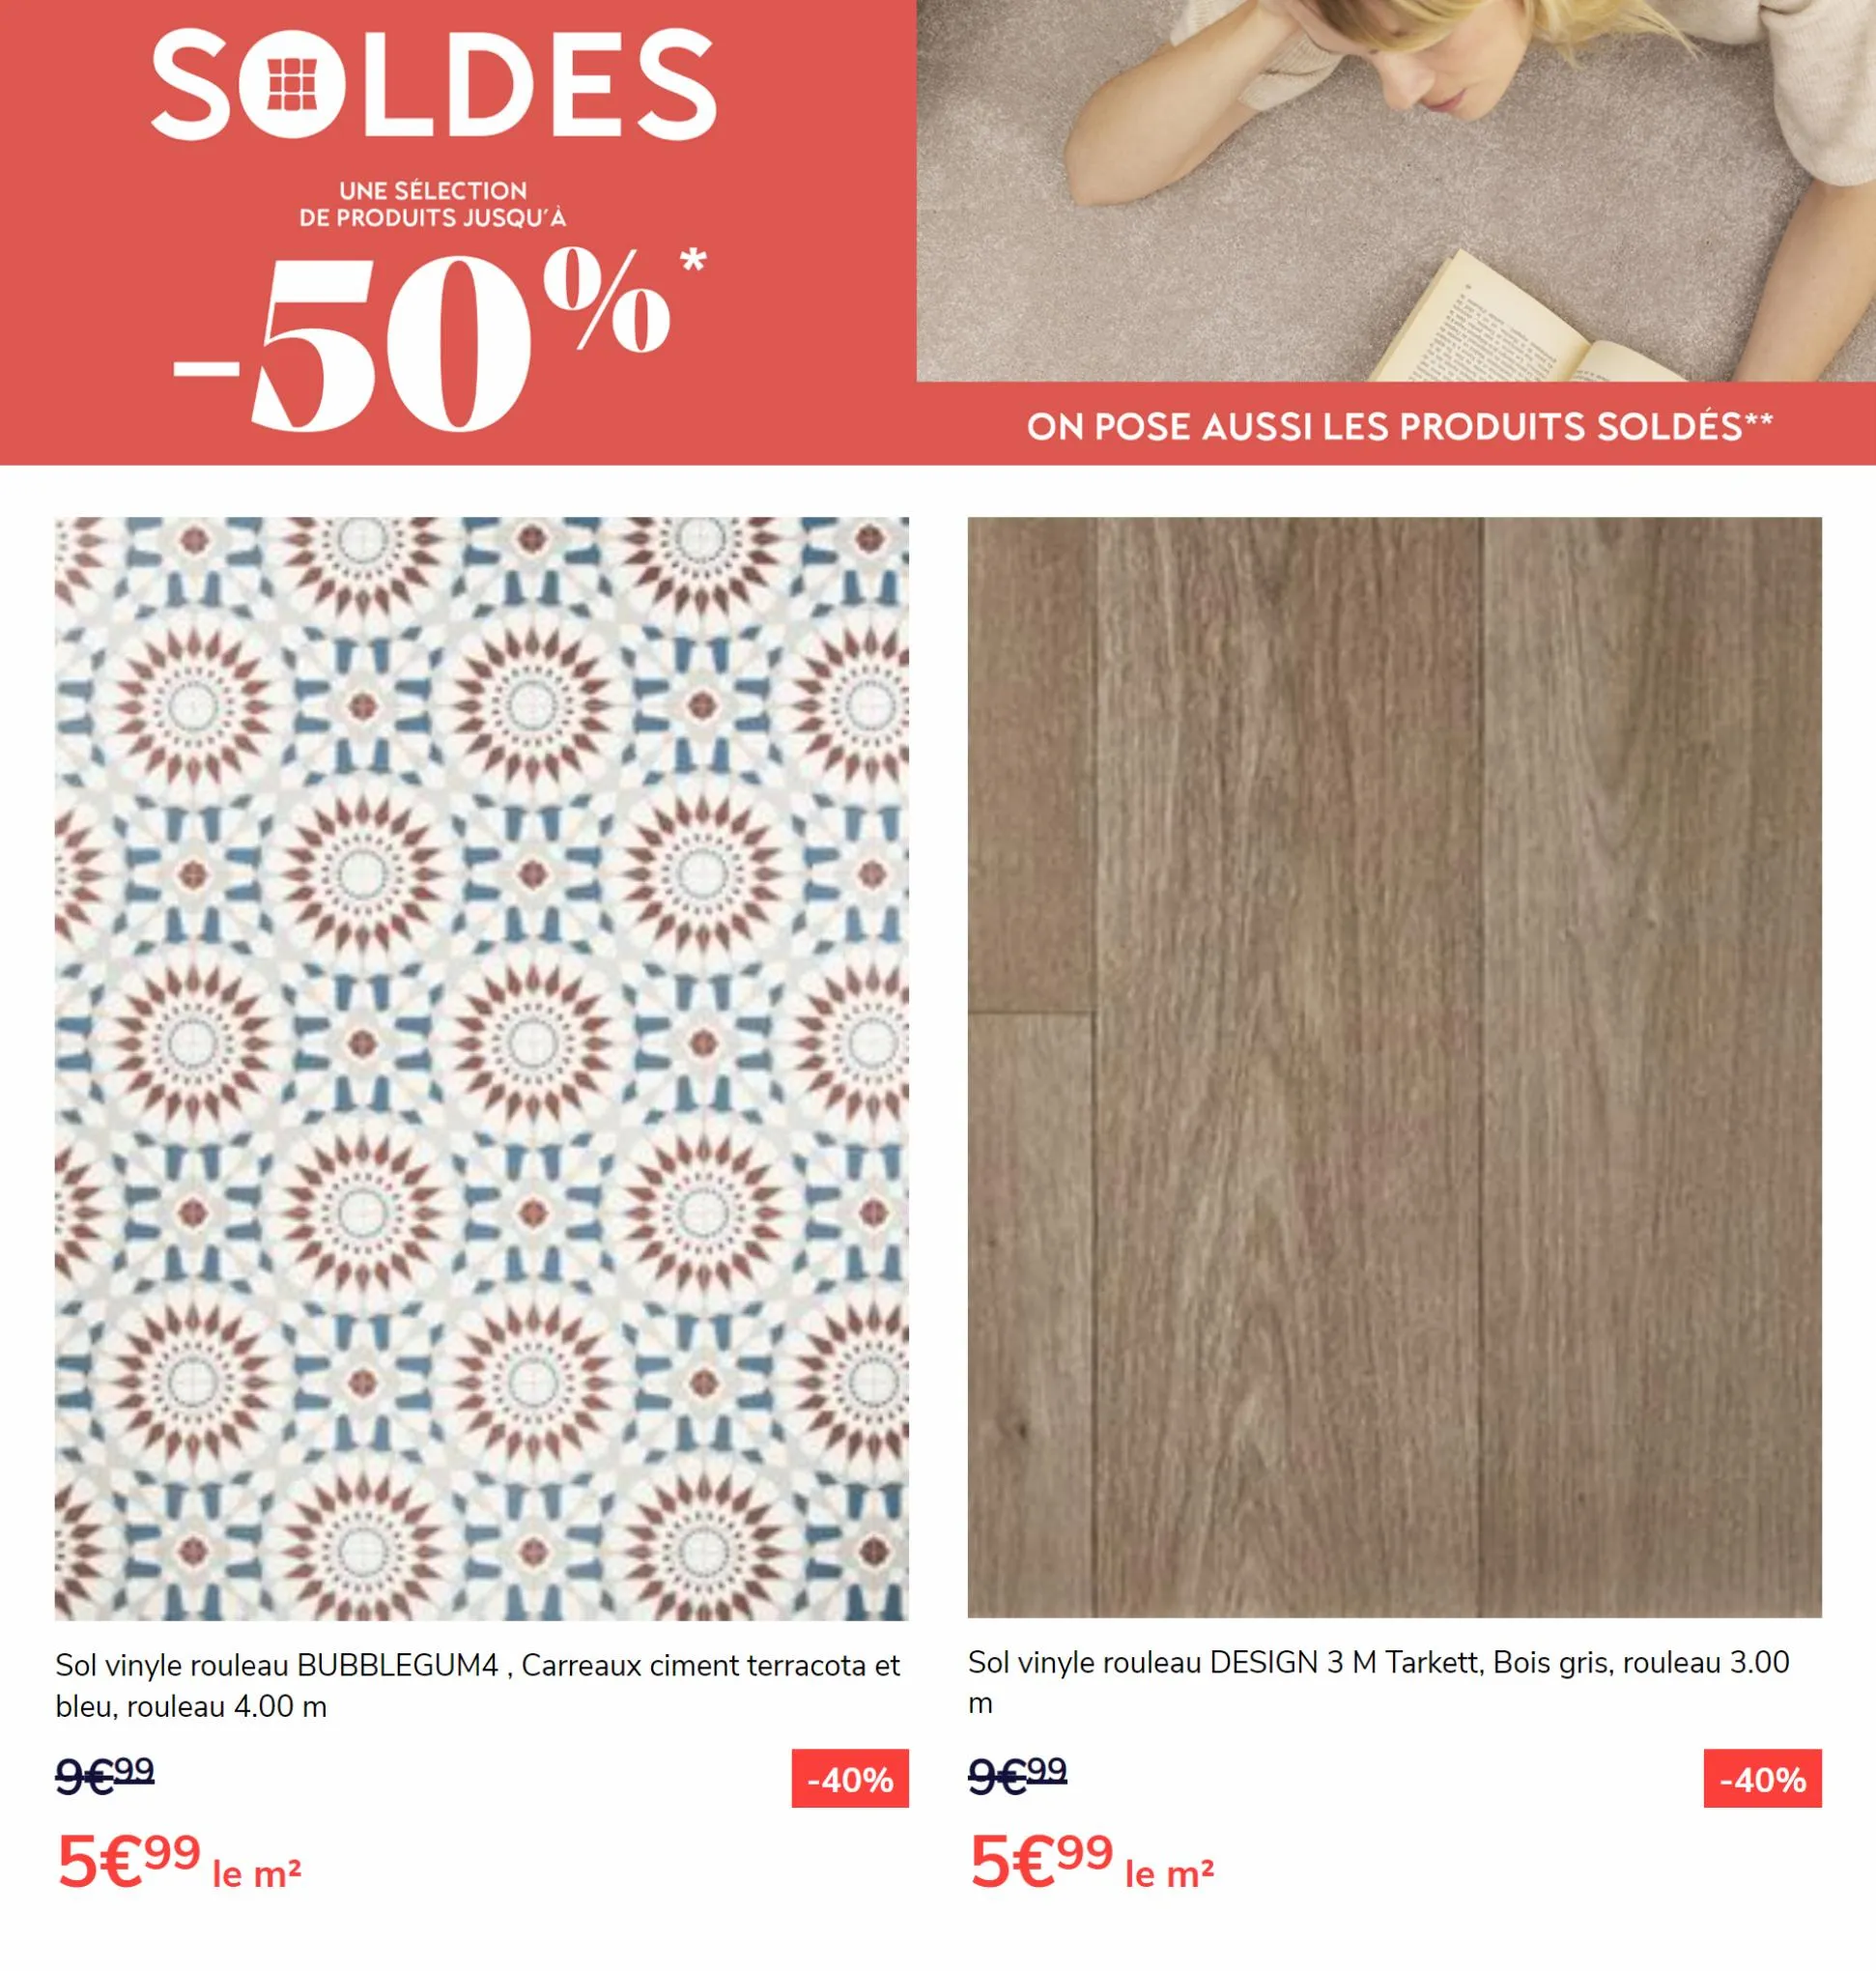 Catalogue SOLDES 50%, page 00002